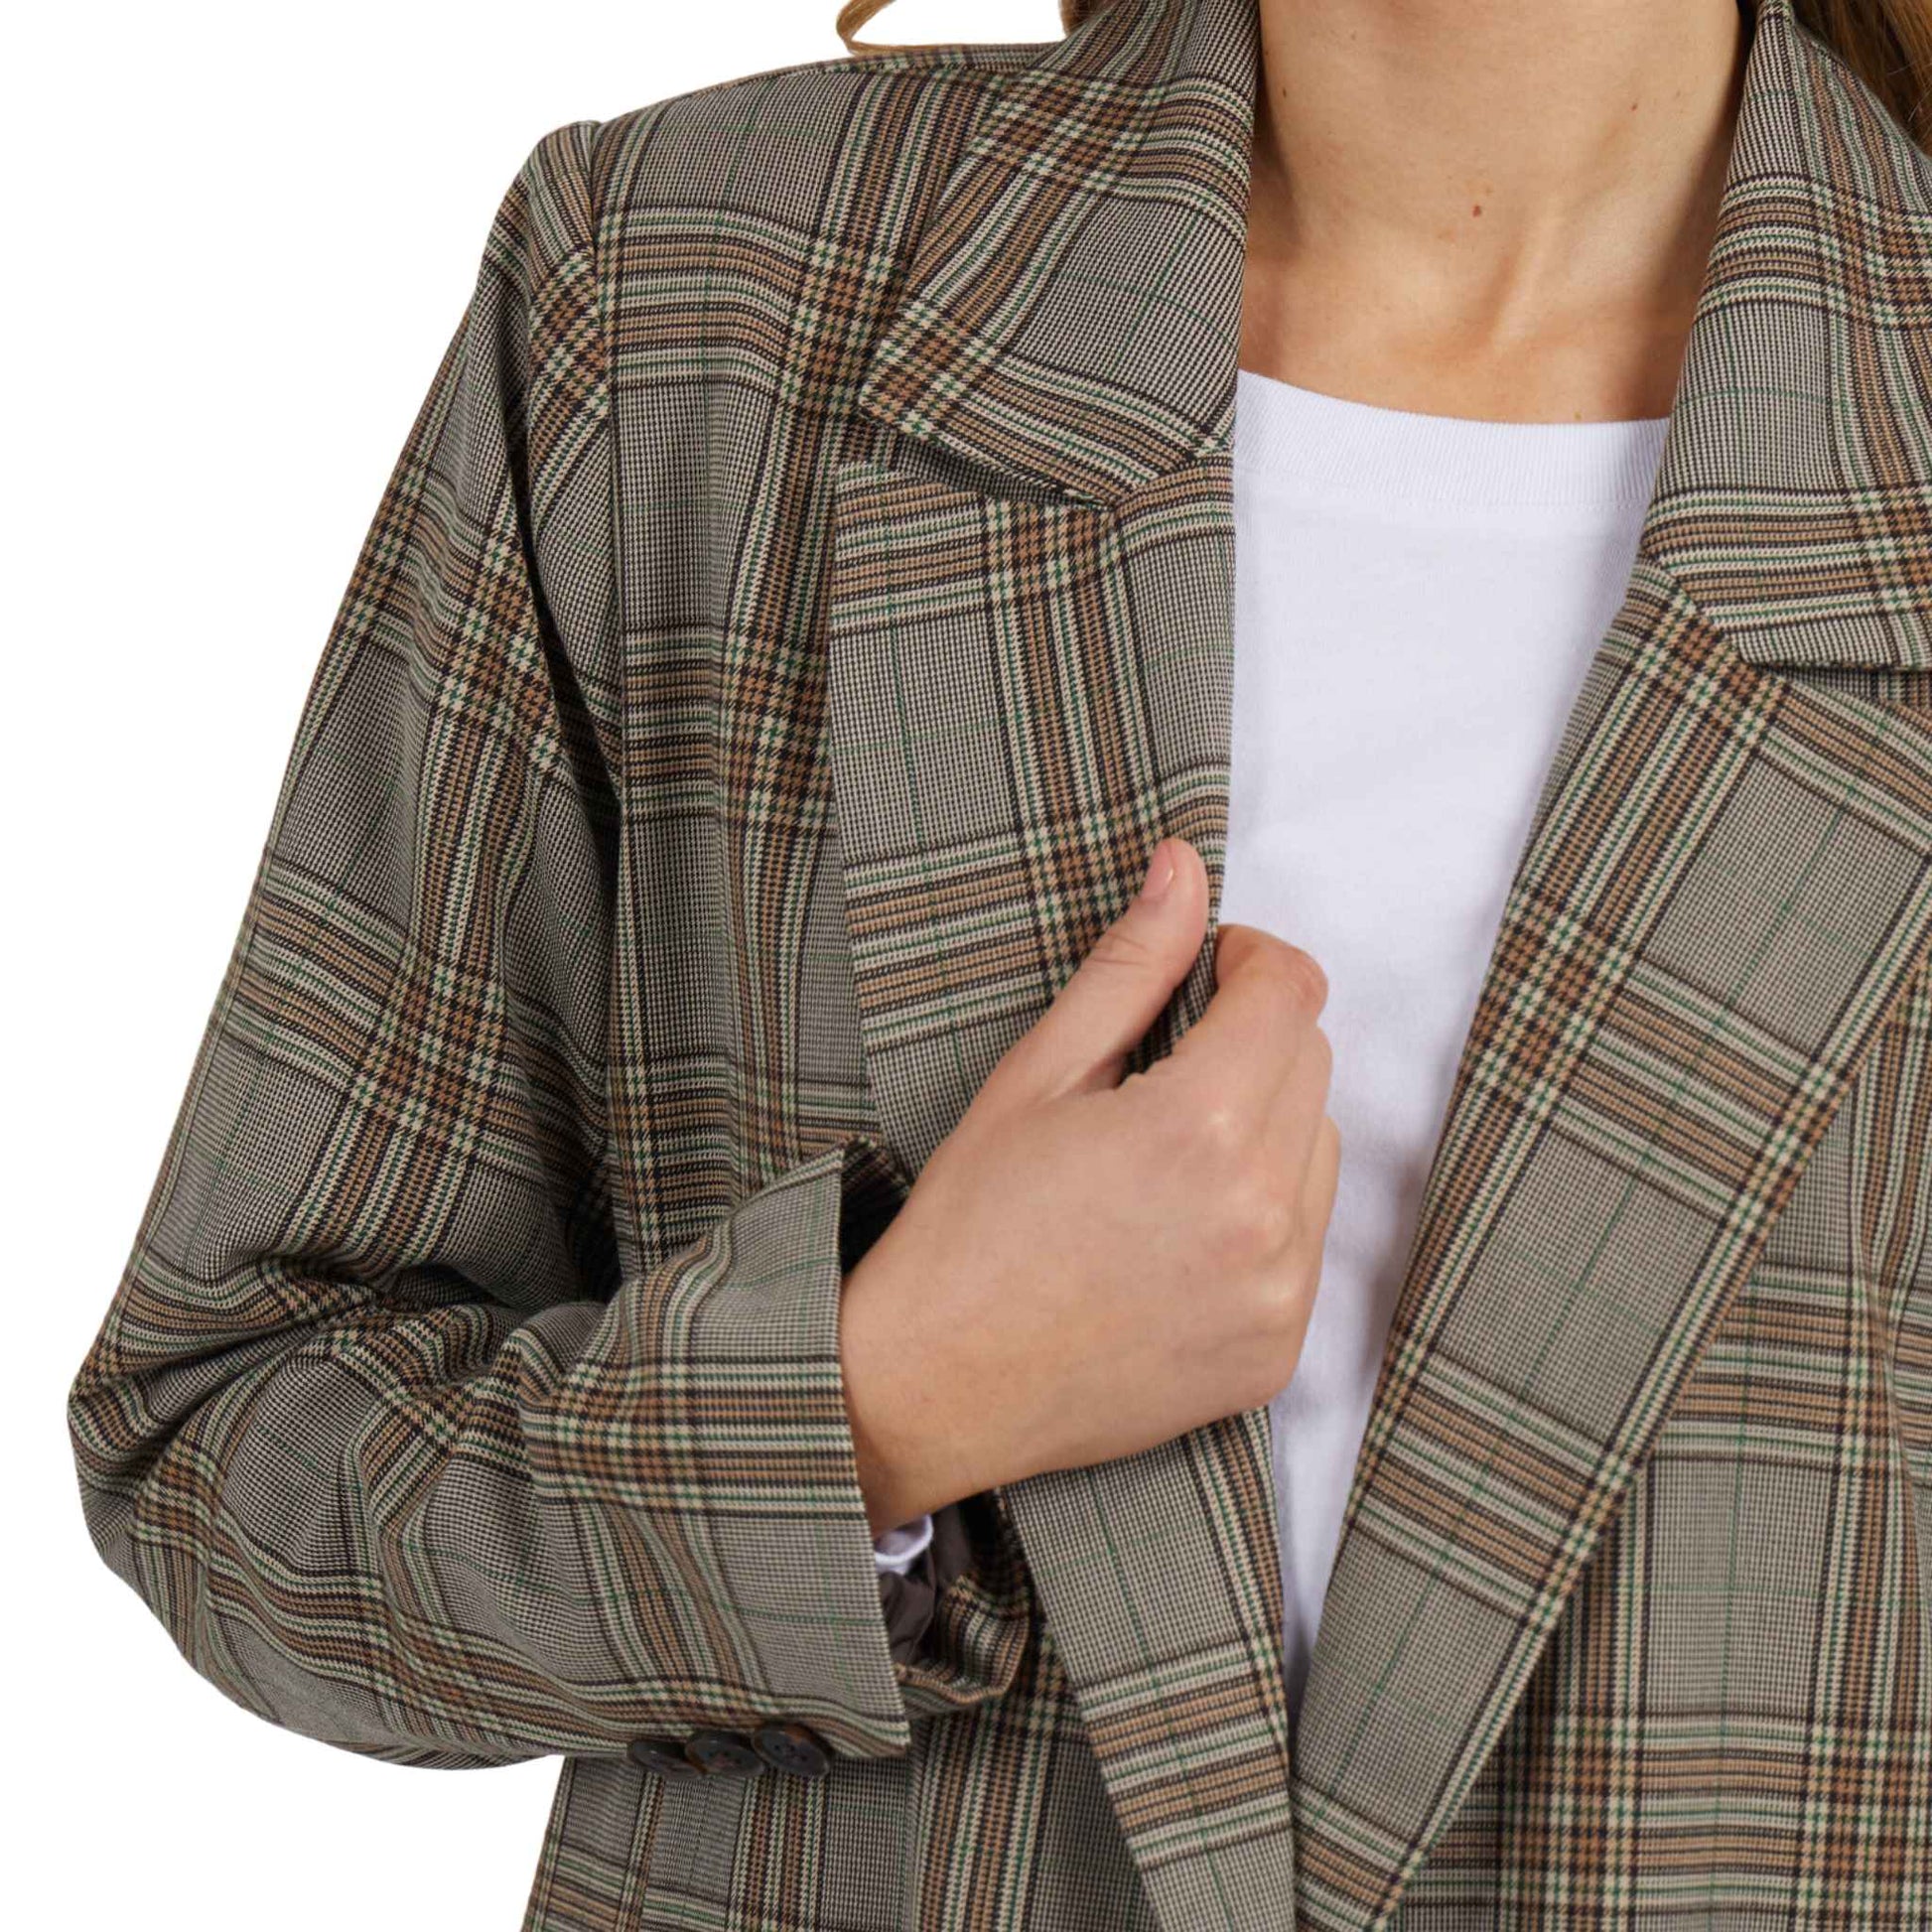 The Foxwood Beatrix Blazer is a traditional oversized blazer with a classic check design pattern, front pockets and button details this double-breasted jacket will have you in control every time you pull it on. Available in store and online at Foxwood Clothing stockist Not Plain Jane.